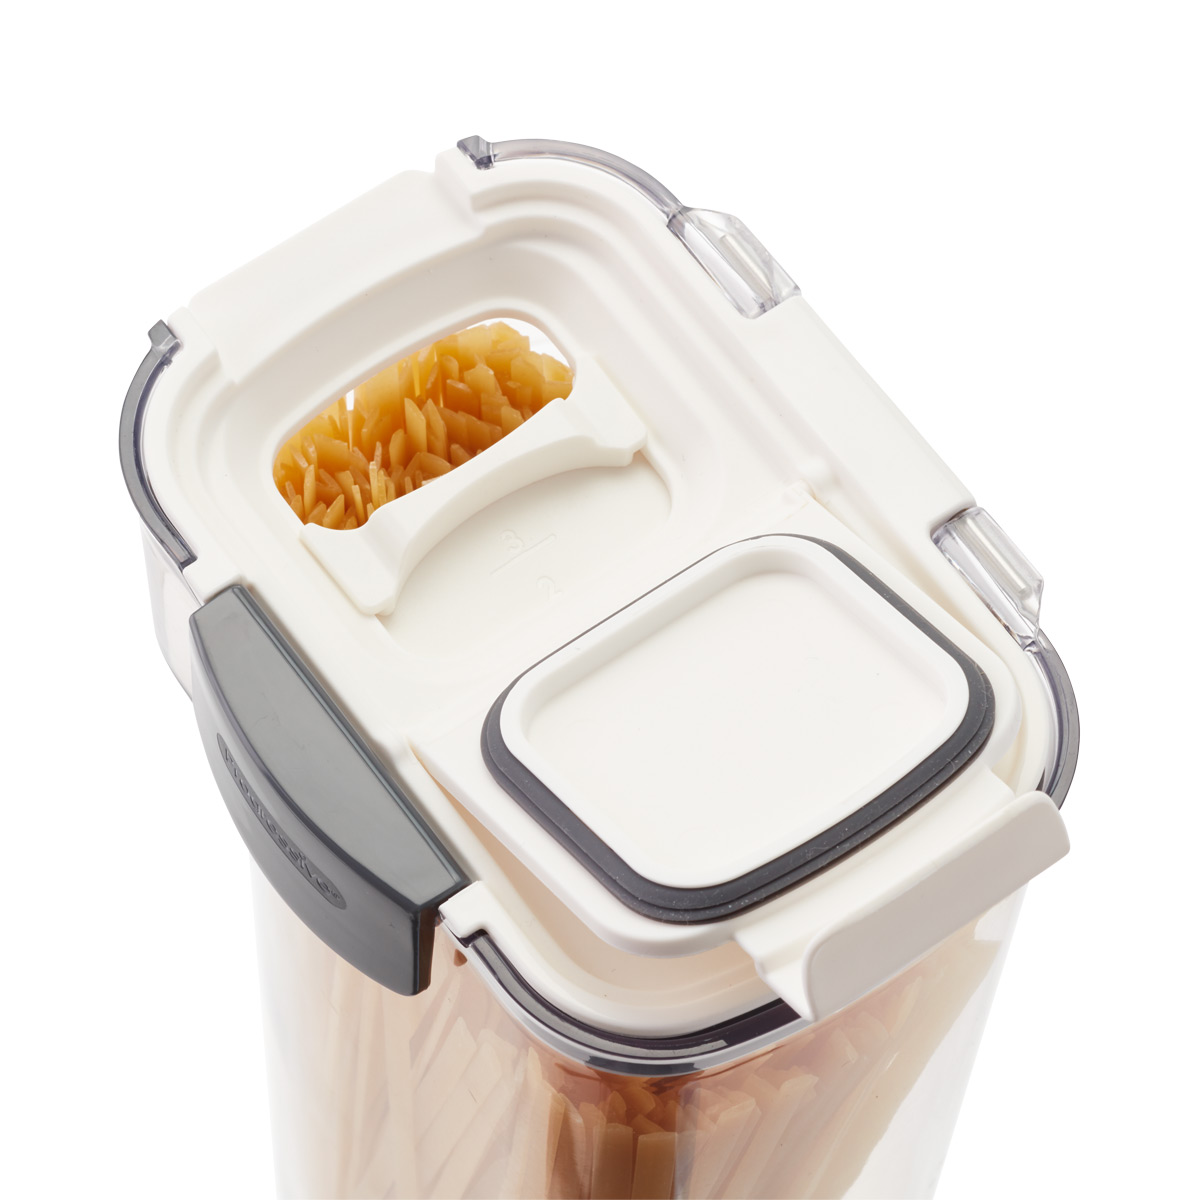 https://www.containerstore.com/catalogimages/316065/10071673-prokeeper-pasta-container_v.jpg